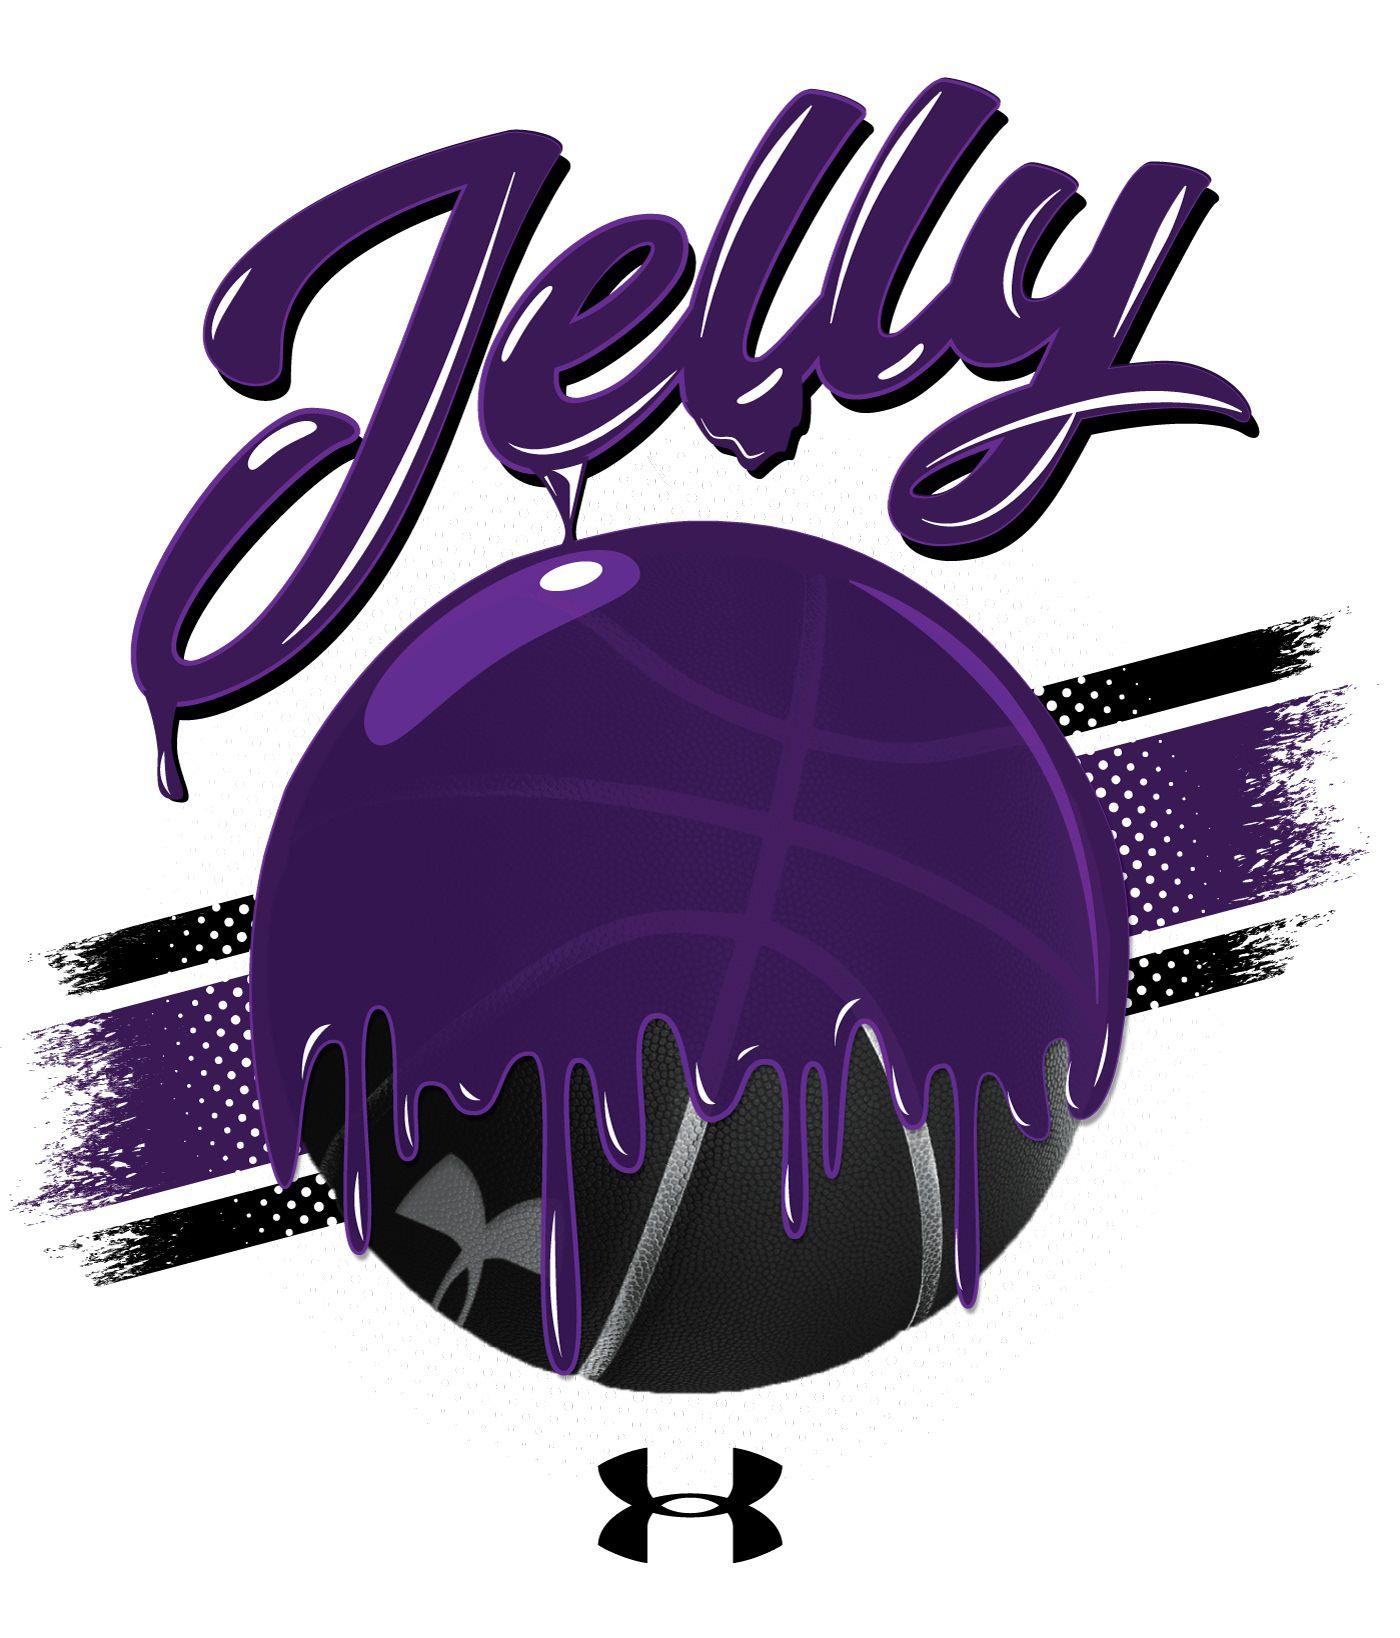 James Risher Armour Jelly Fam Tees. basketball